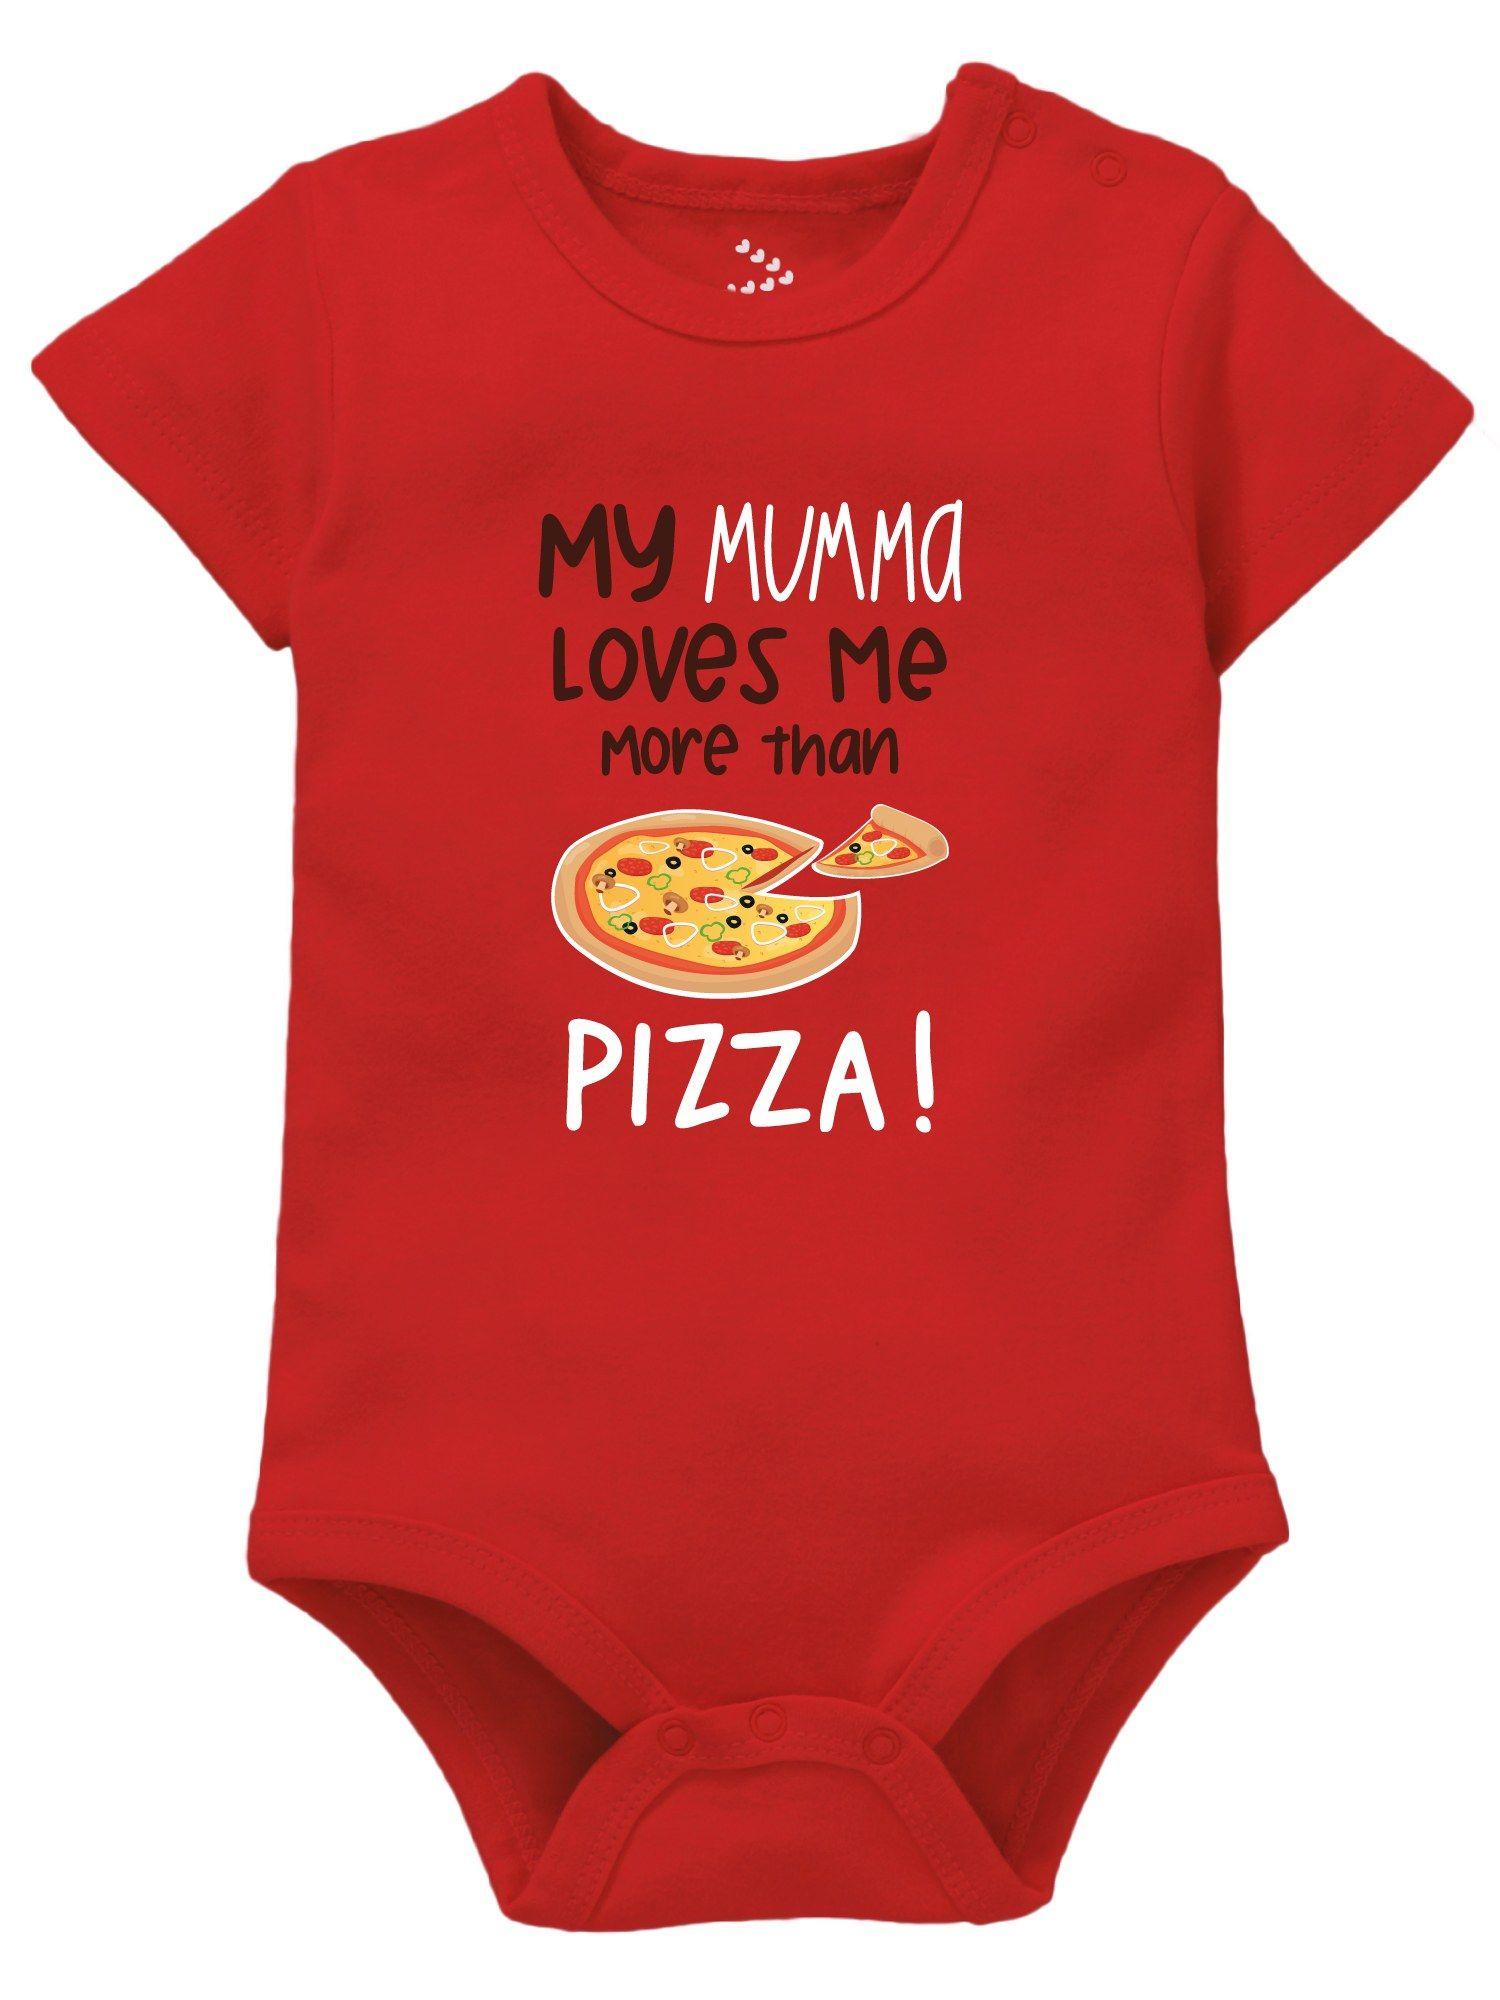 my mumma loves me more than pizza mom baby bodysuit red